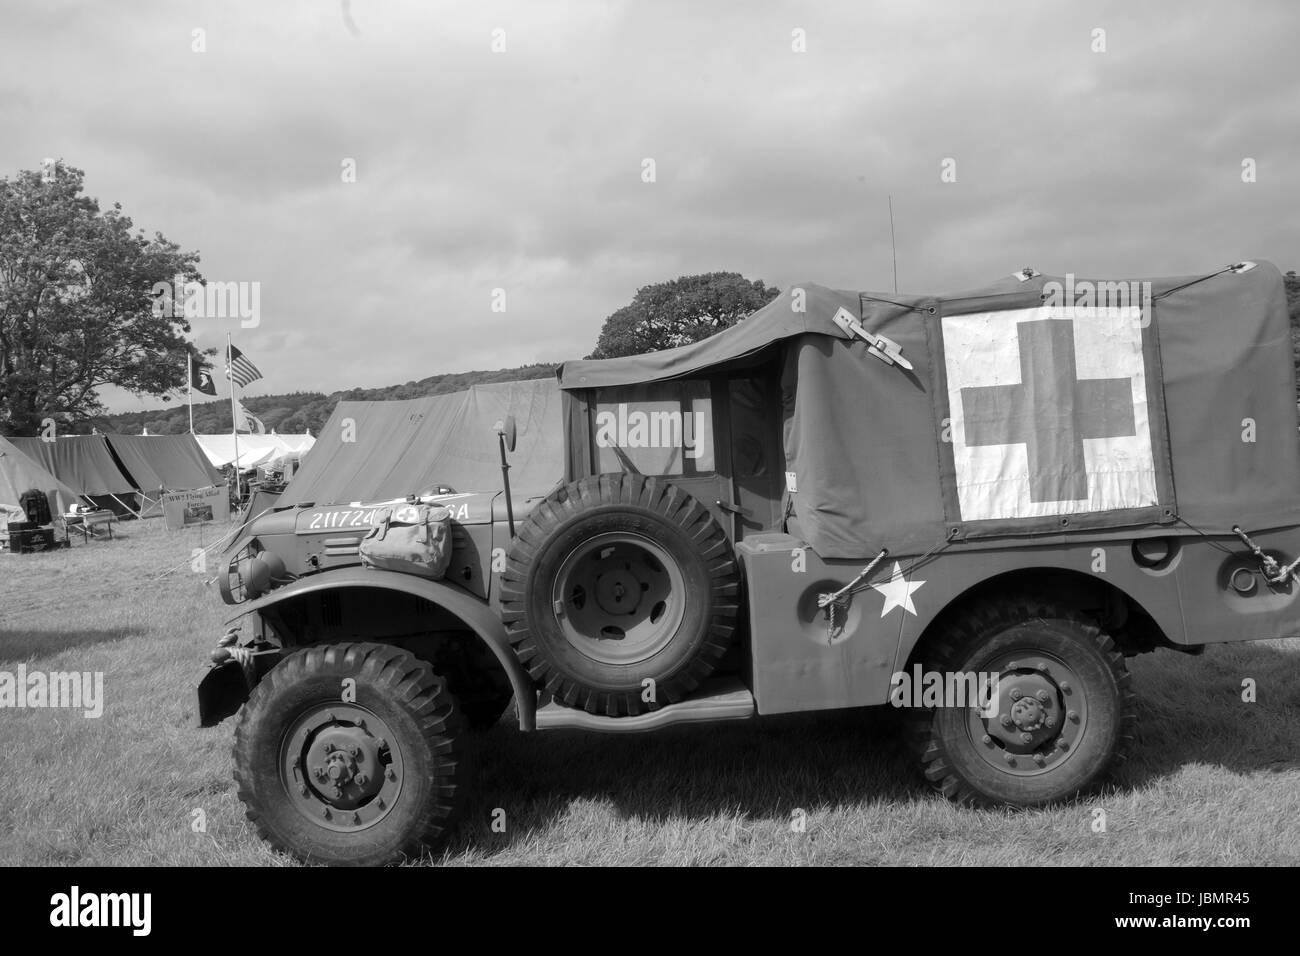 10th june 2017 - US Military ambulance at the War and peace show at Wraxall in North Somerset.Engalnd. Stock Photo